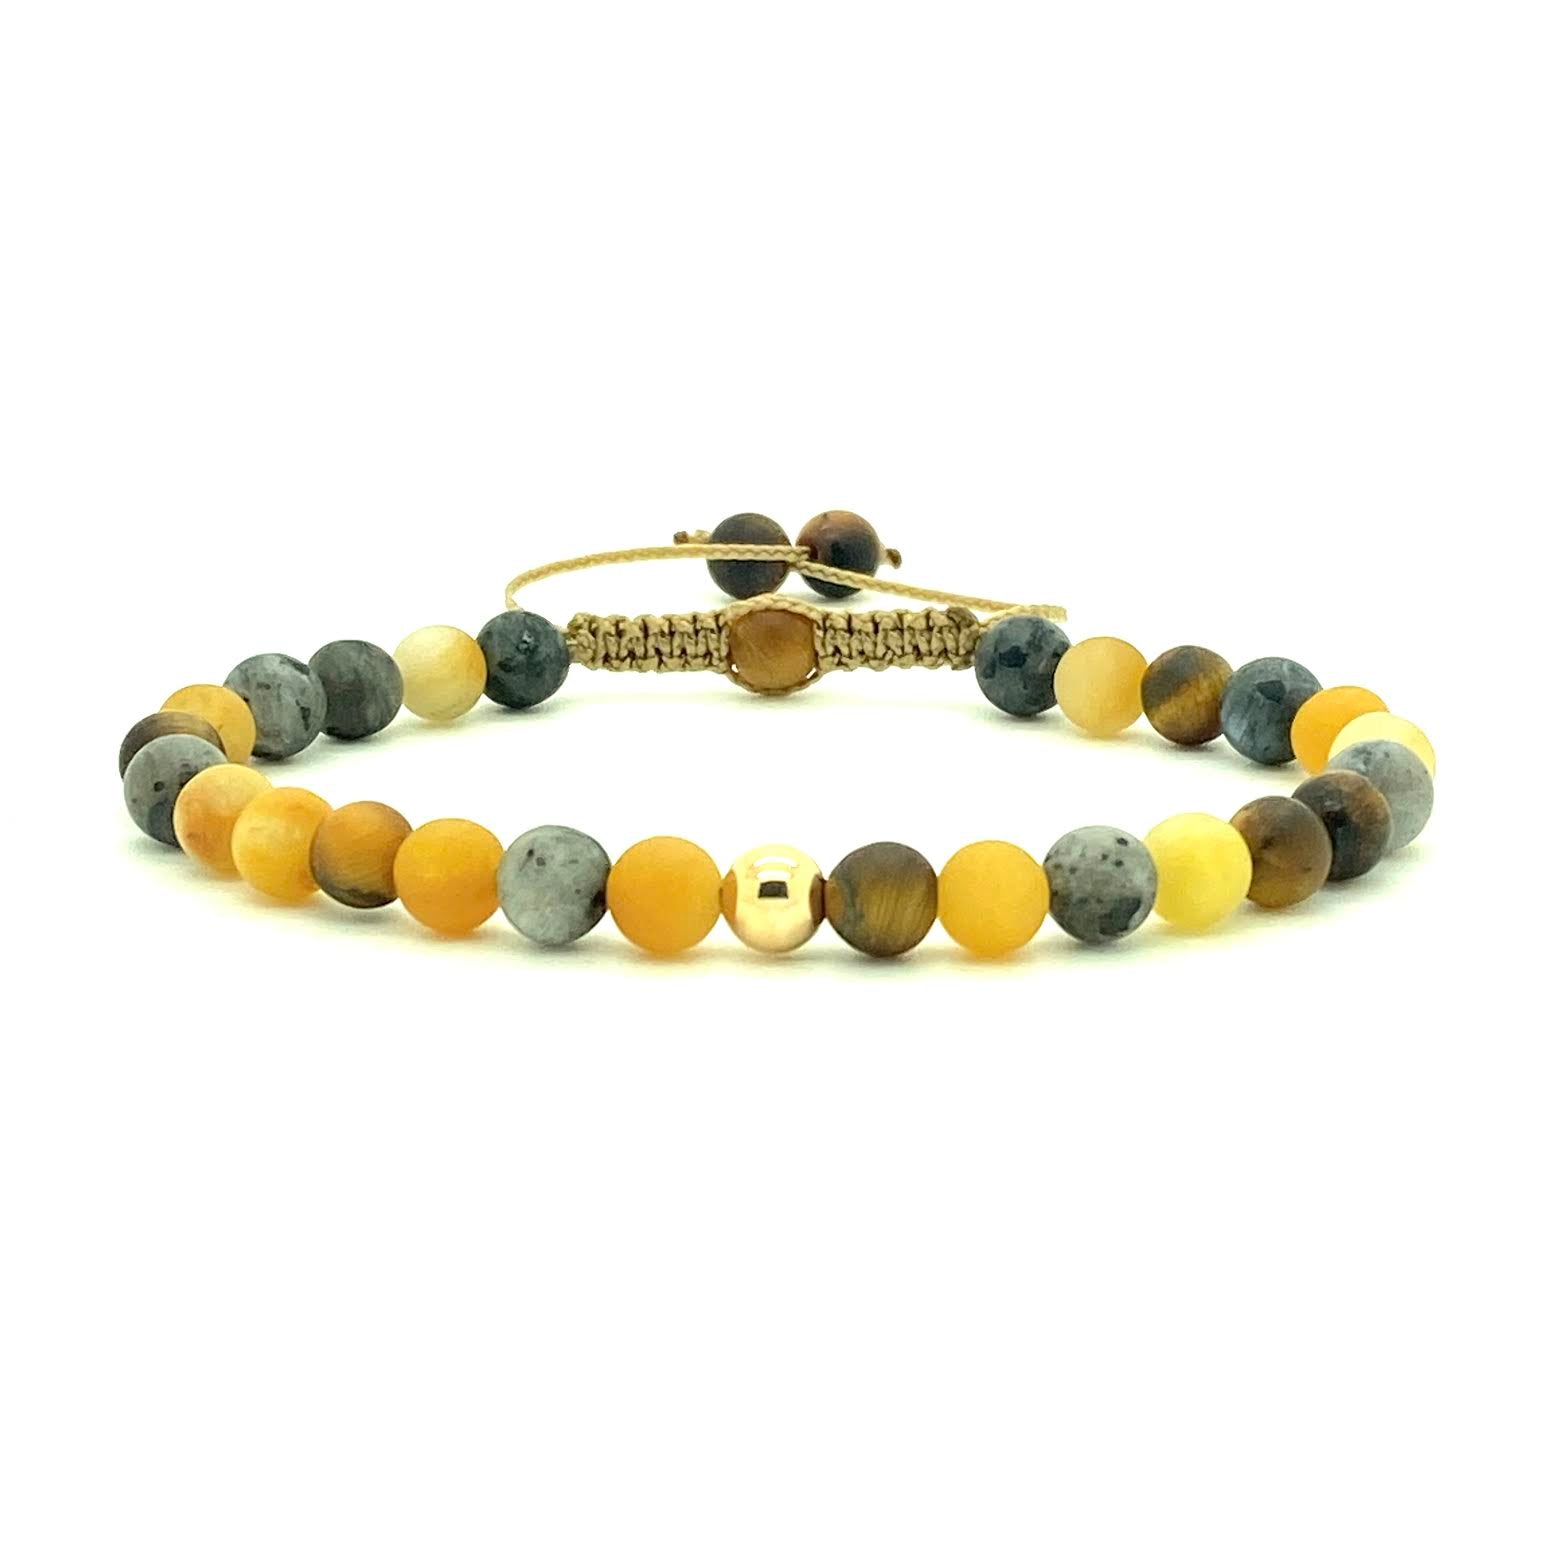 Tiger's Eye is a stunning semi-precious stone that has the power to heal, protect, and produce positive energy. Accented with yellow jade beads and your choice of two 14K solid white, rose or yellow gold bead. Hand knotted adjustable cord for a perfect fit. Made by WristBend